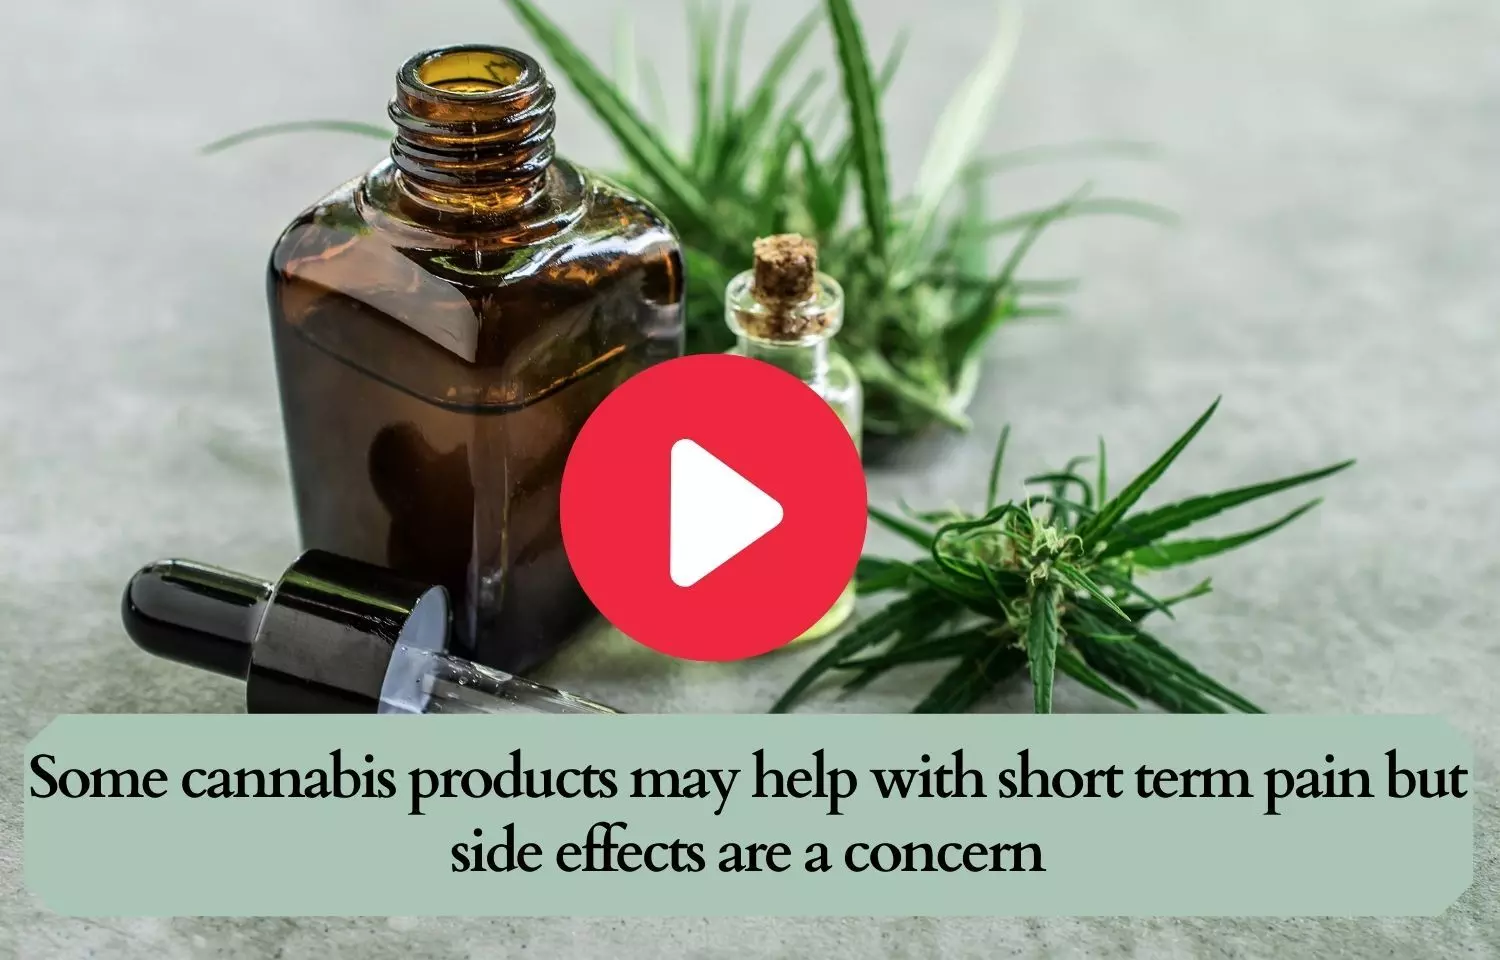 Some cannabis products may help with short term pain but side effects are a concern